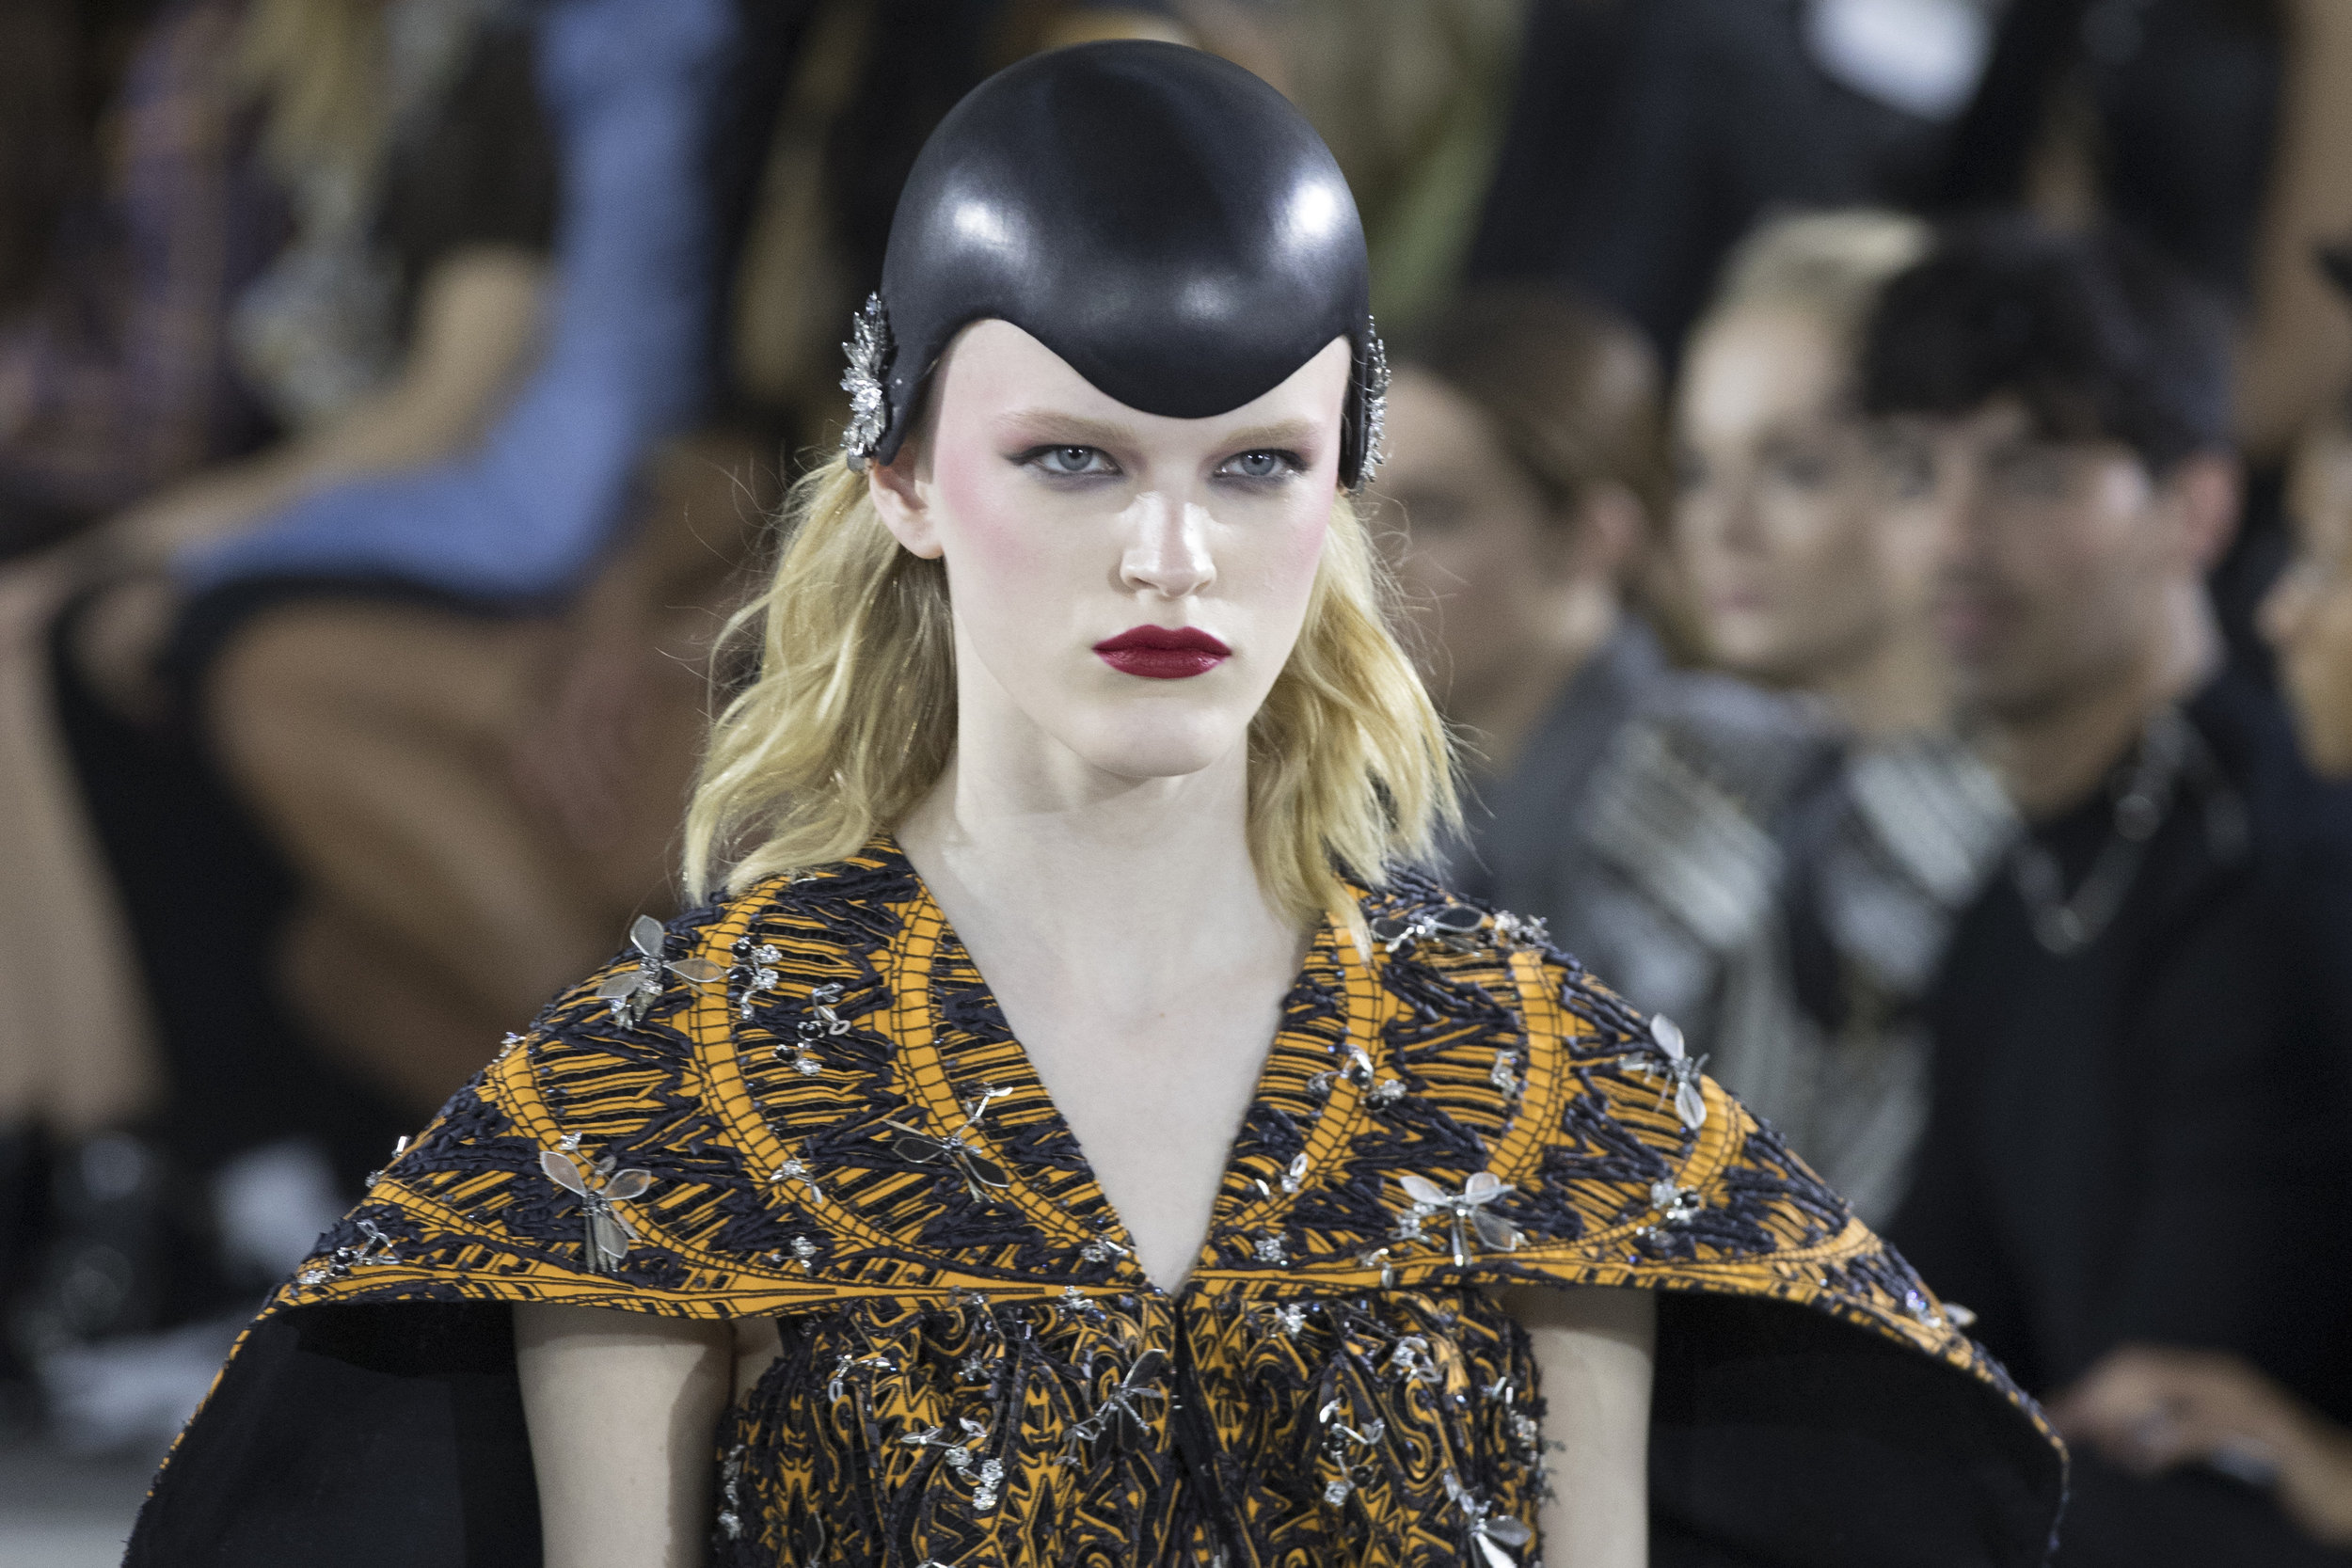 Louis Vuitton show transports guests at JFK — Queens Daily Eagle